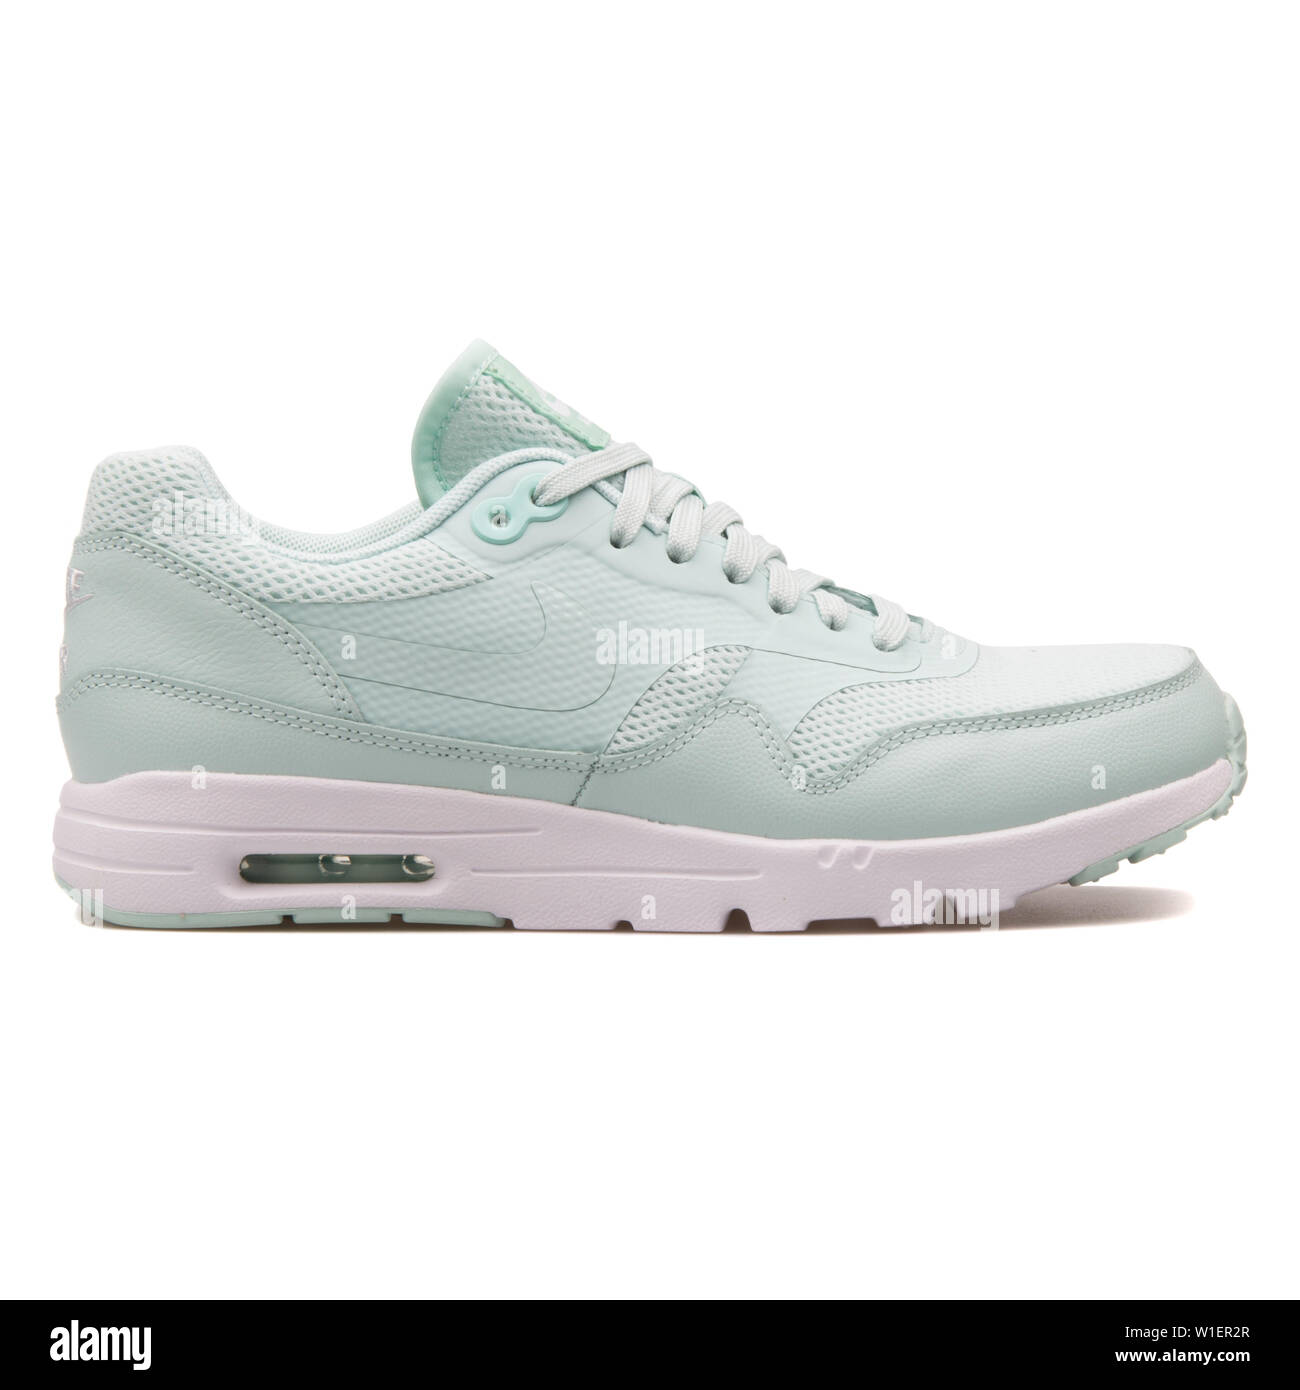 VIENNA, AUSTRIA - AUGUST 10, 2017: Nike Air Max Thea Ultra Essentials mint  sneaker on white background Stock Photo - Alamy